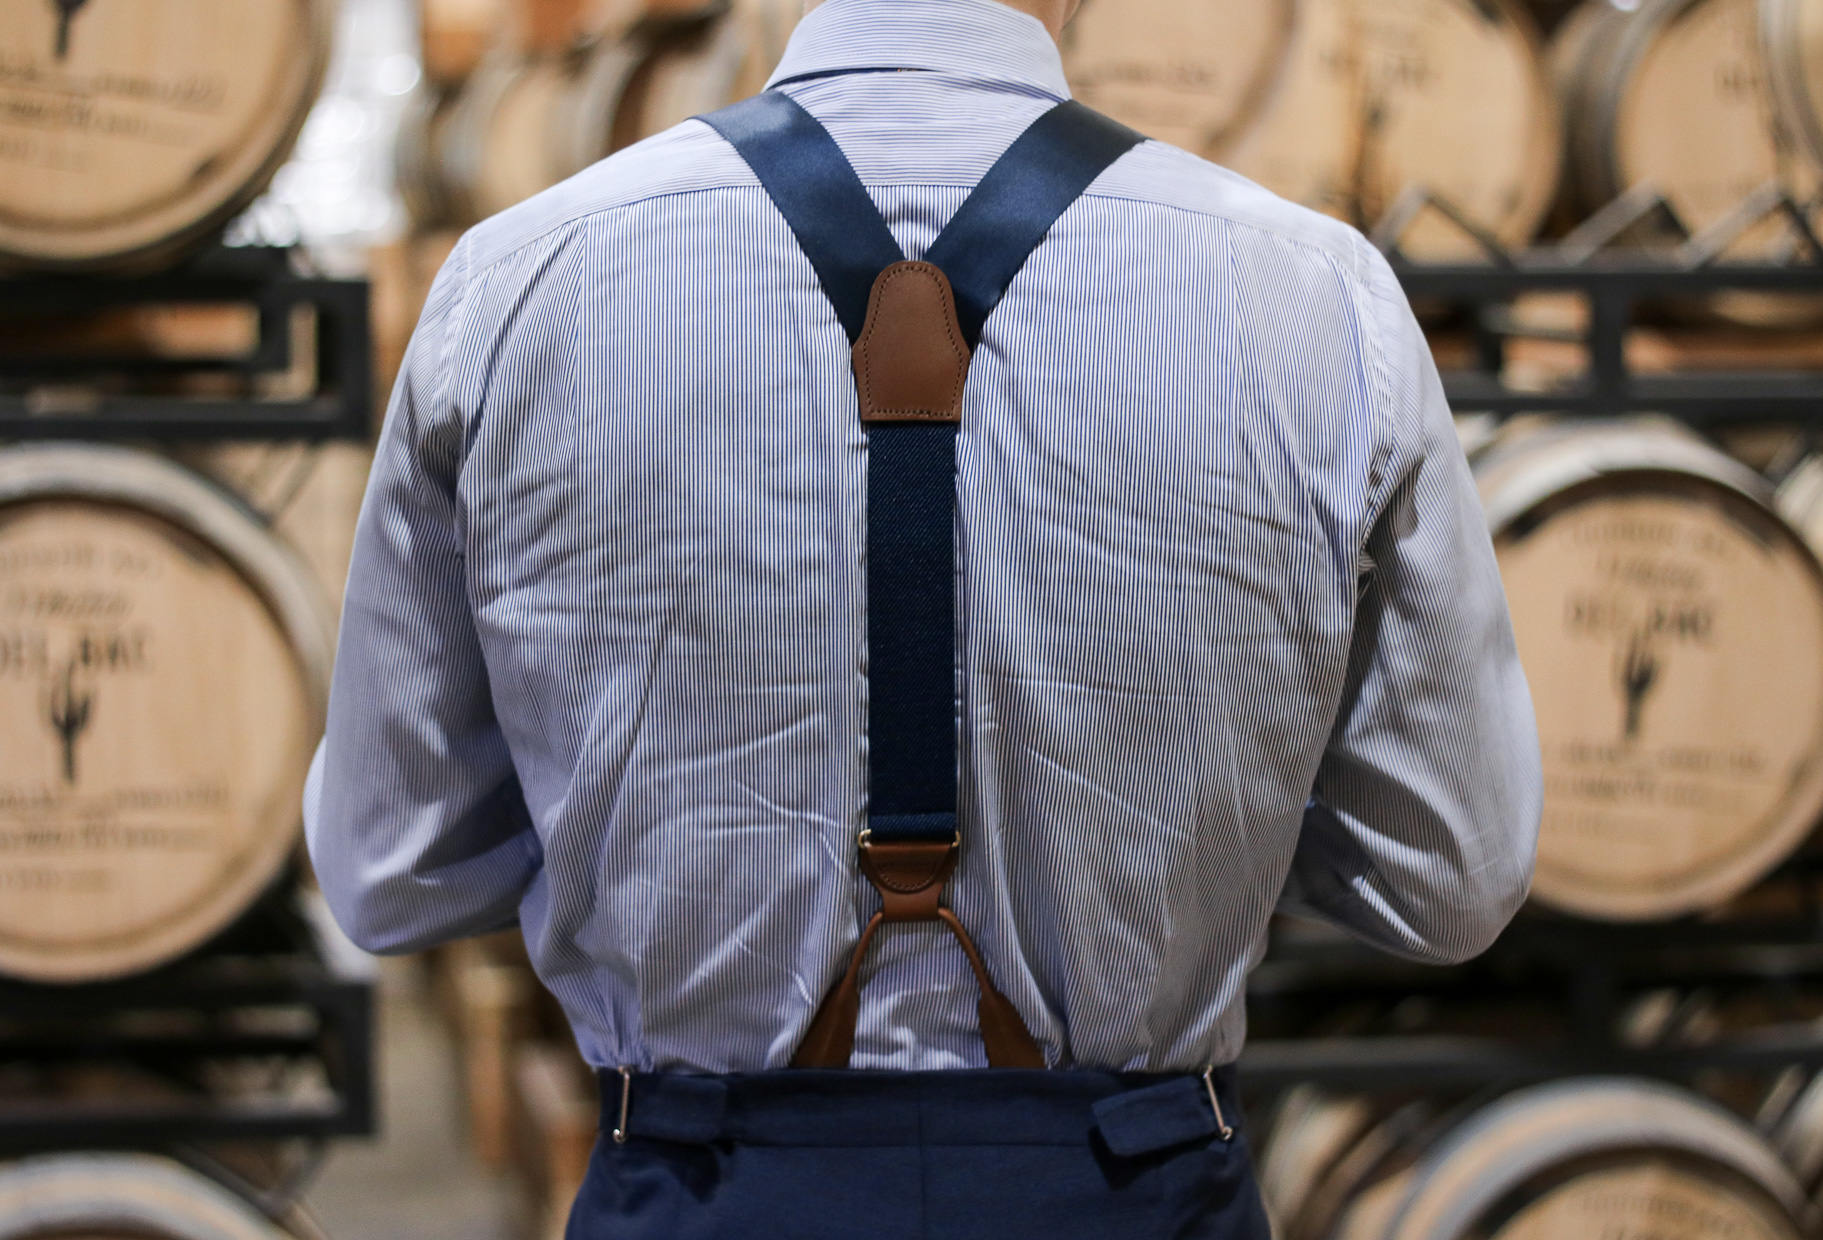 Reasons Why Suspenders Are Better Than Belts